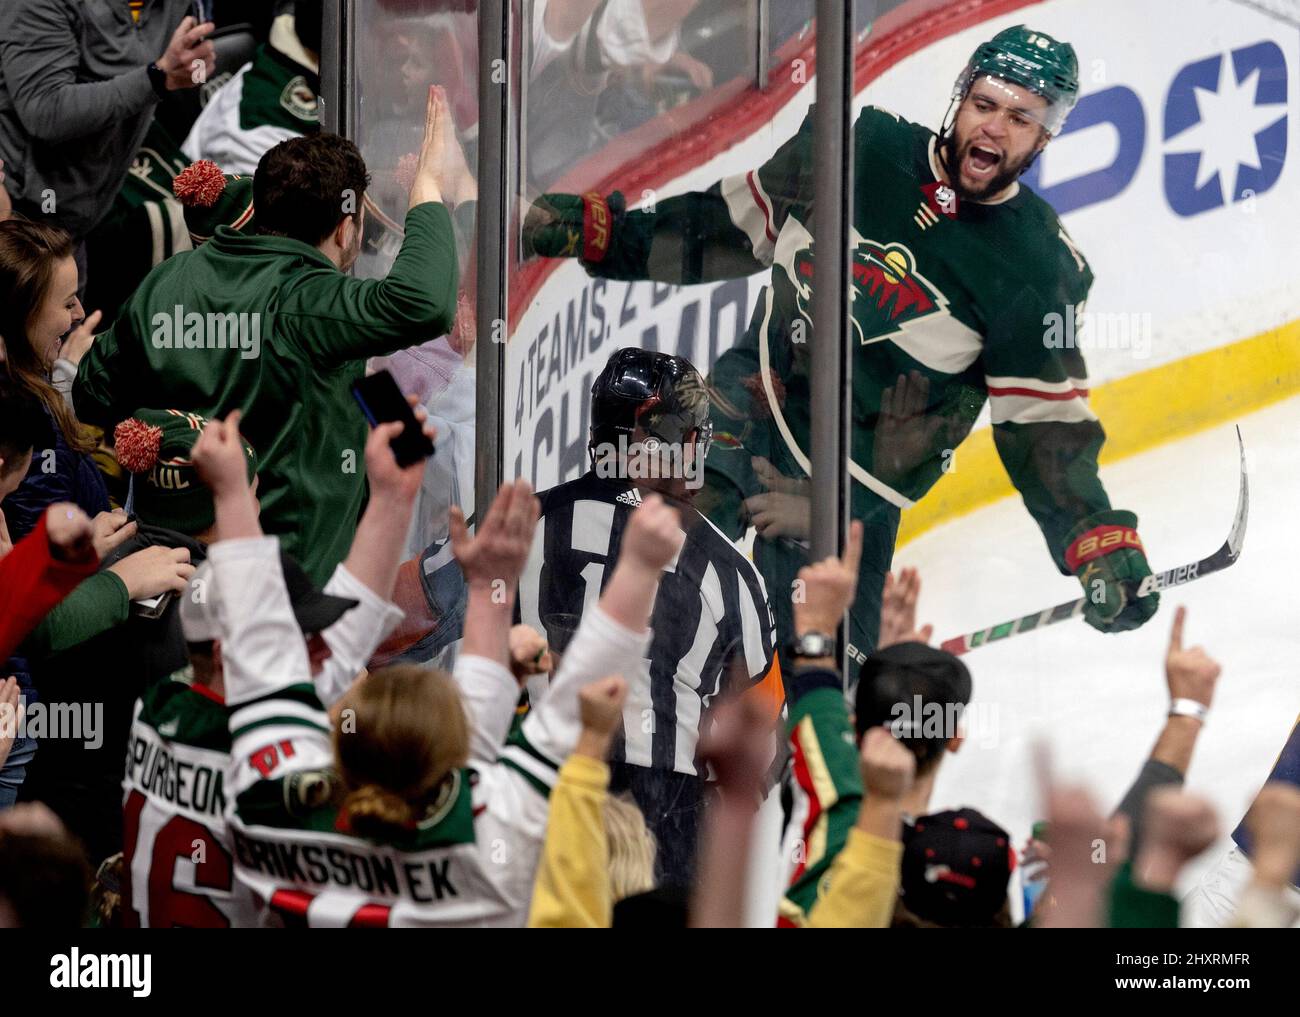 Minnesota Wild Panoramic Picture - Xcel Energy Center NHL Fan Cave Decor